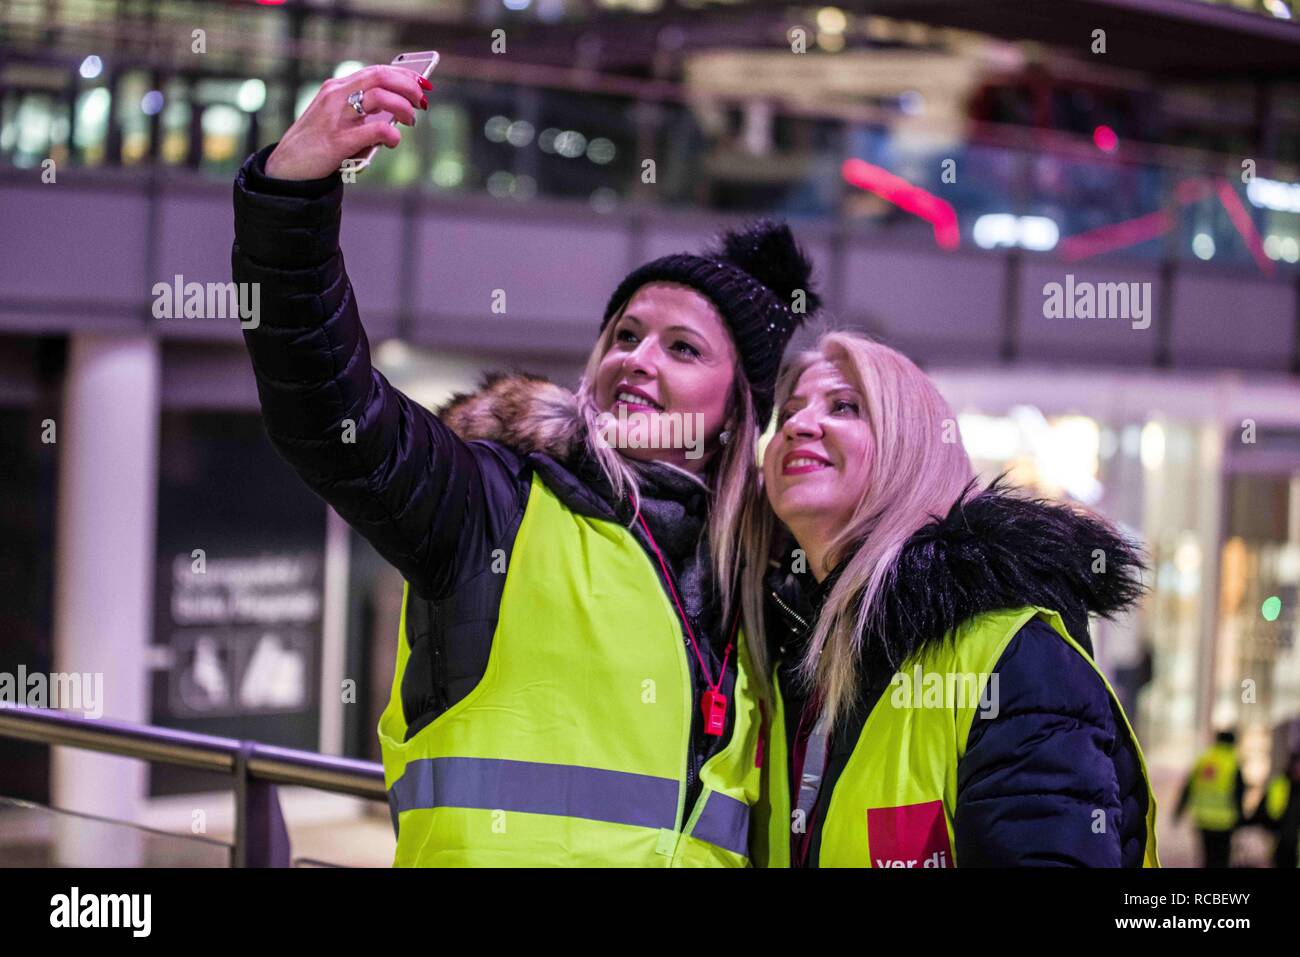 Munich, Bavaria, Germany. 15th Jan, 2019. Citing a breakdown in talks with employers on December 21st, the German Ver.di union organized the latest warning strike in a series at the Munich International Airport with members employed in Airport Security Services (Luftsicherheit) walking out from 3:30am to 24:00. The union is demanding 20 Euros per hour for their 1,000 total members working in Passenger-, Freight, Personnel, and Goods Control of Airport Security, along with recertification to bring other members to the same level. They are also requesting other members receive Ã¢â‚¬Å“subst Stock Photo